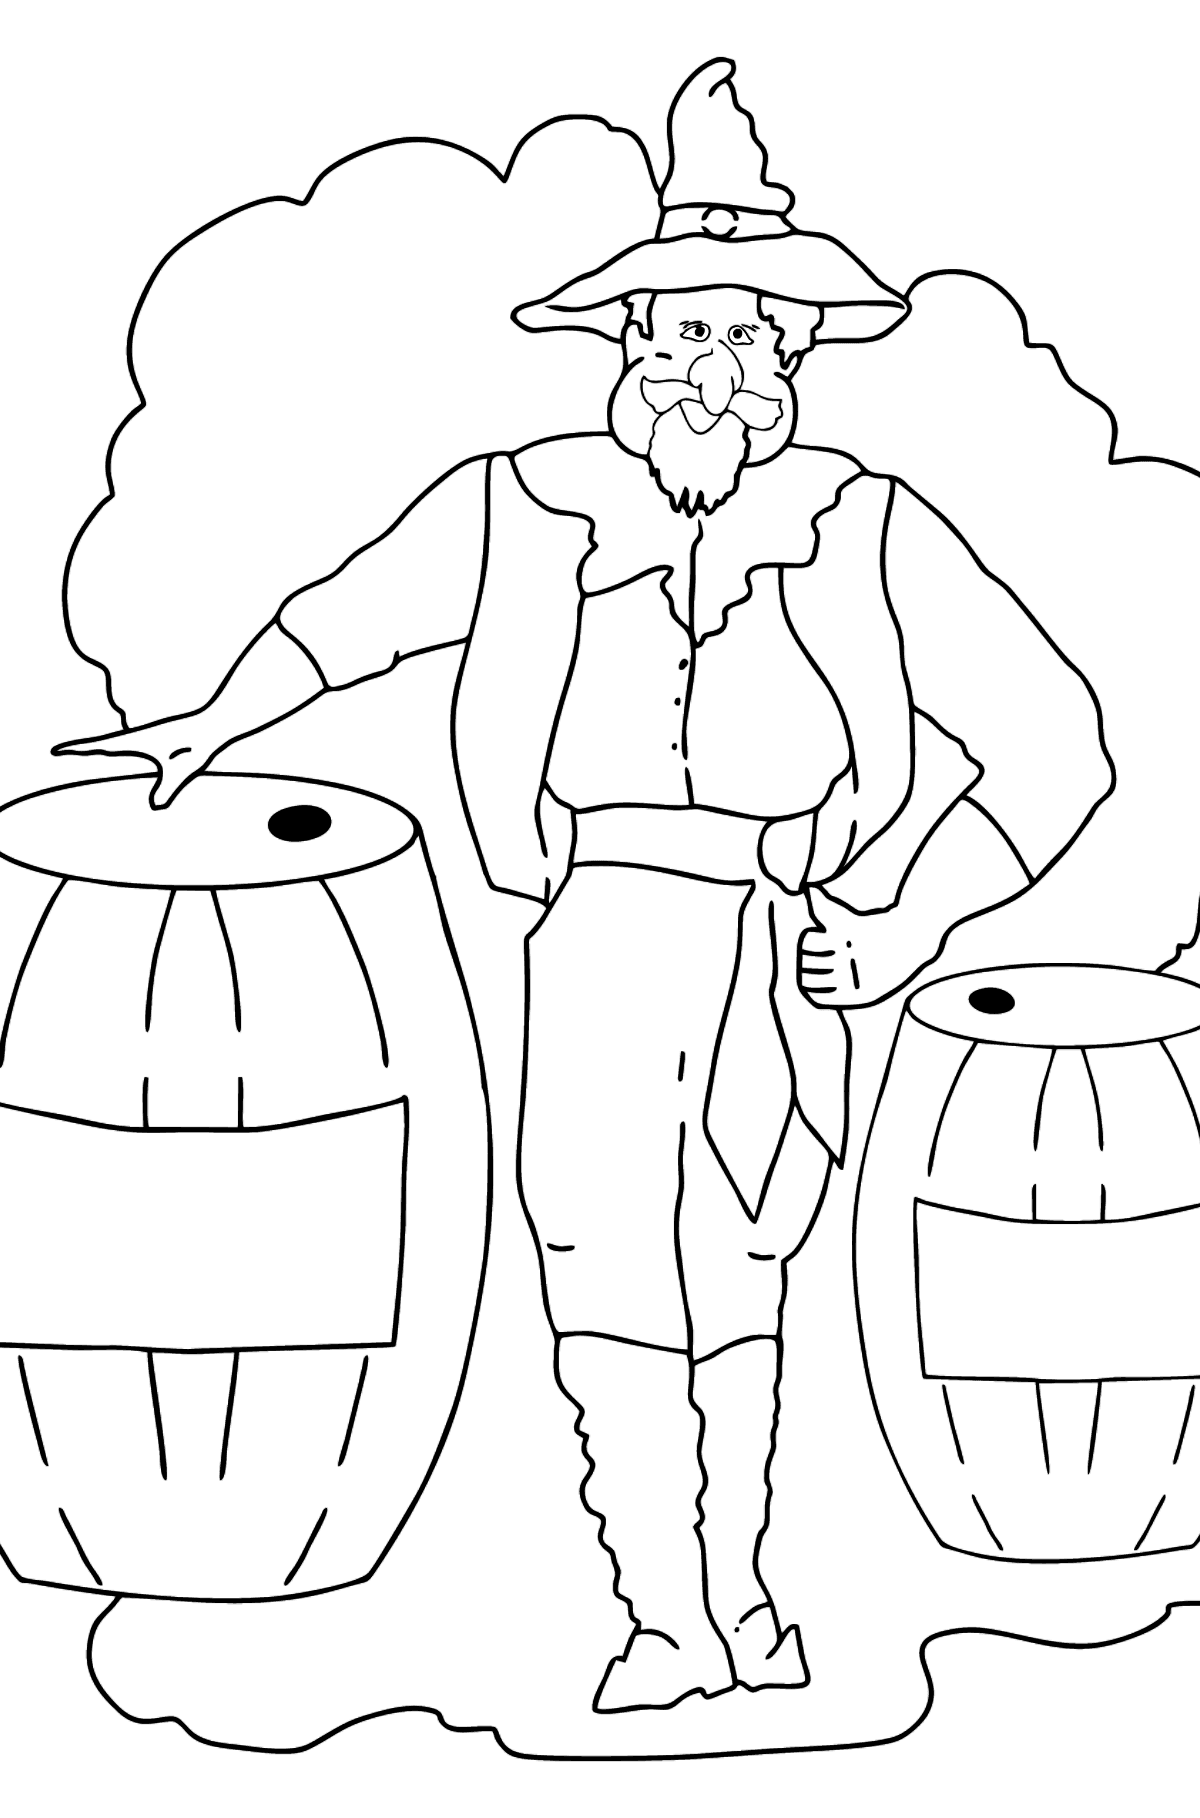 Coloring Page - A Pirate Loves Lemonade - Coloring Pages for Kids